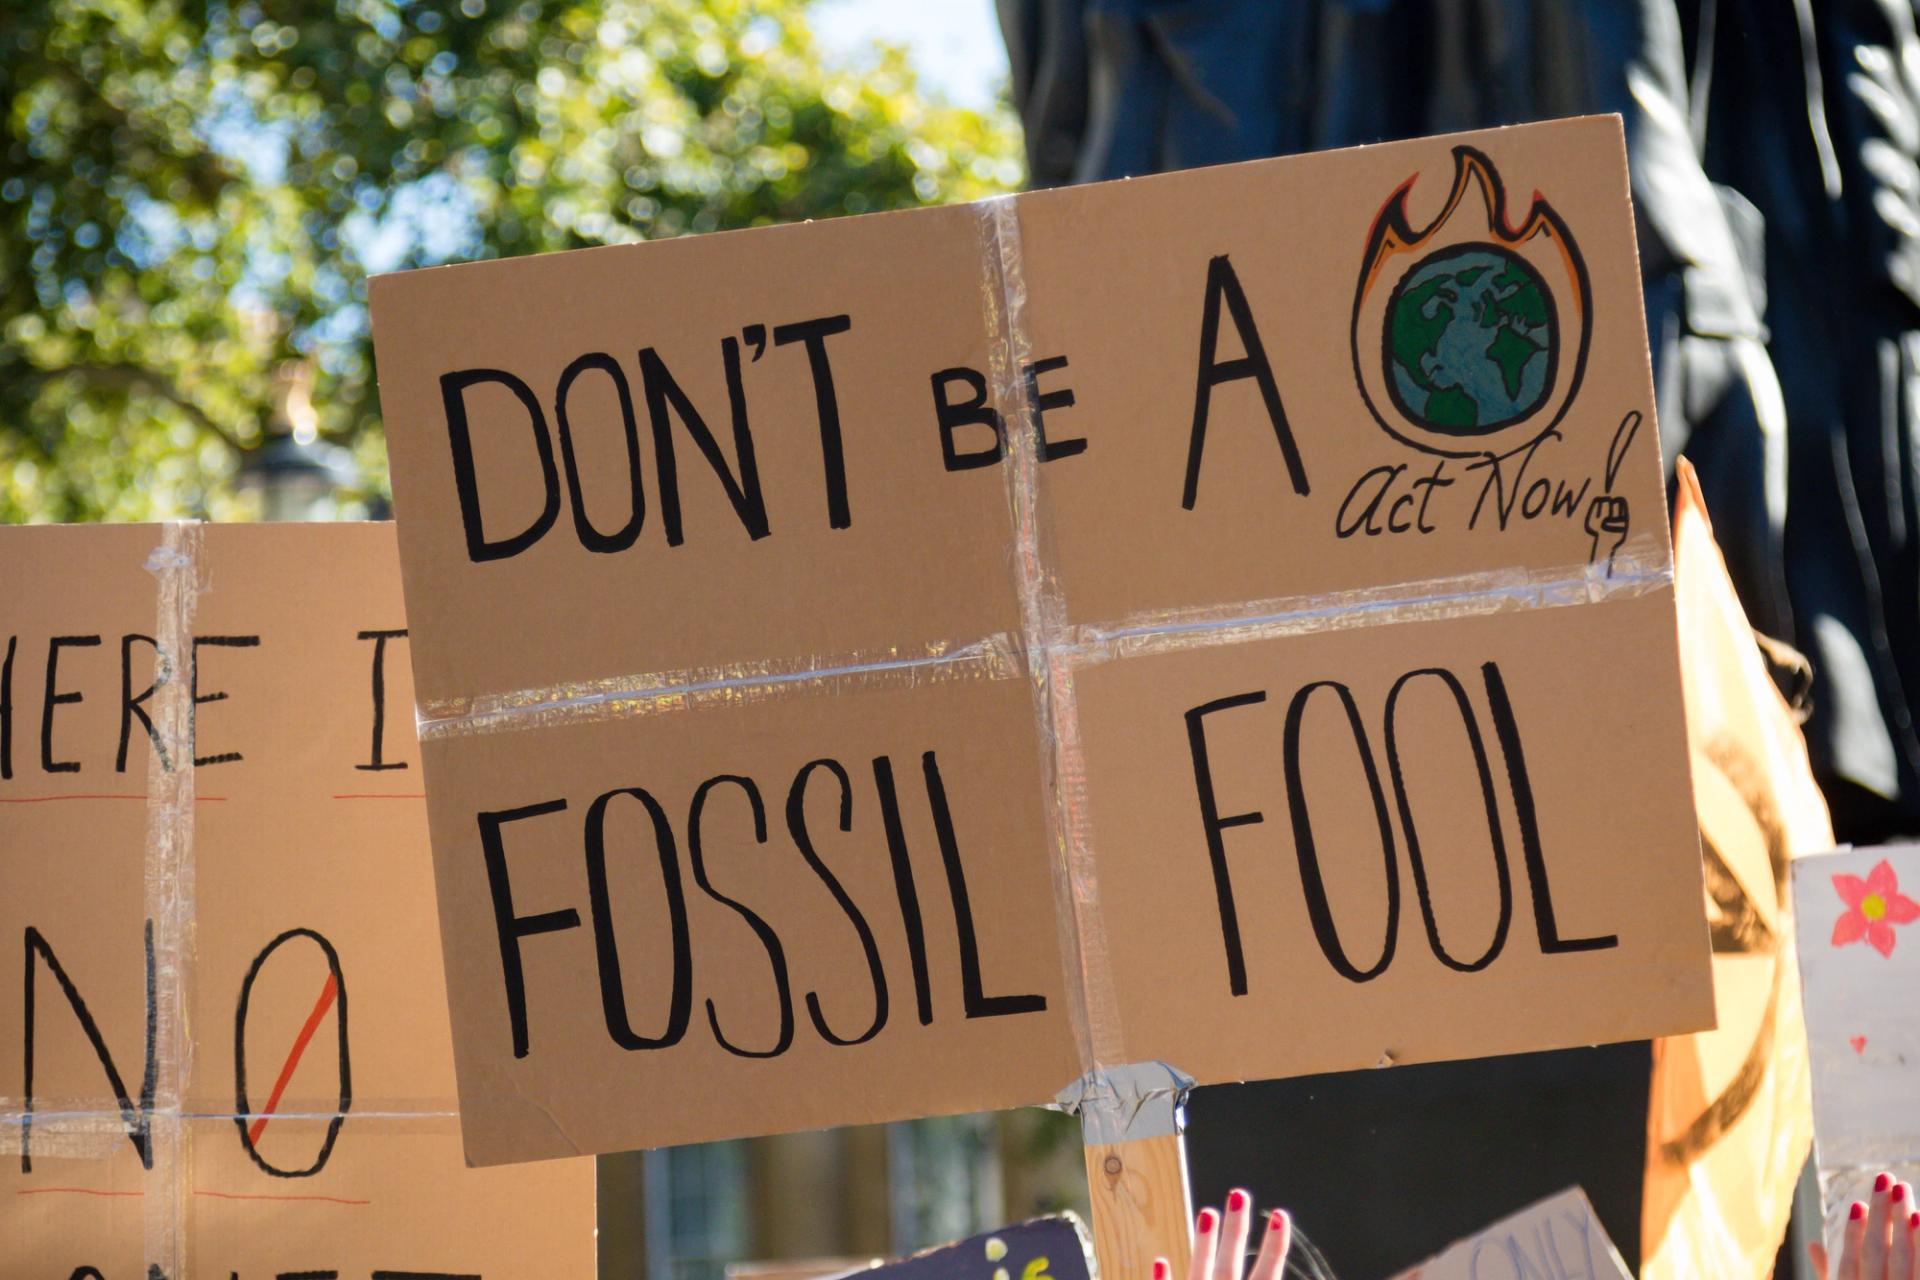 Photograph of a hand-made protest placard, reading “Don’t be a fossil fool”